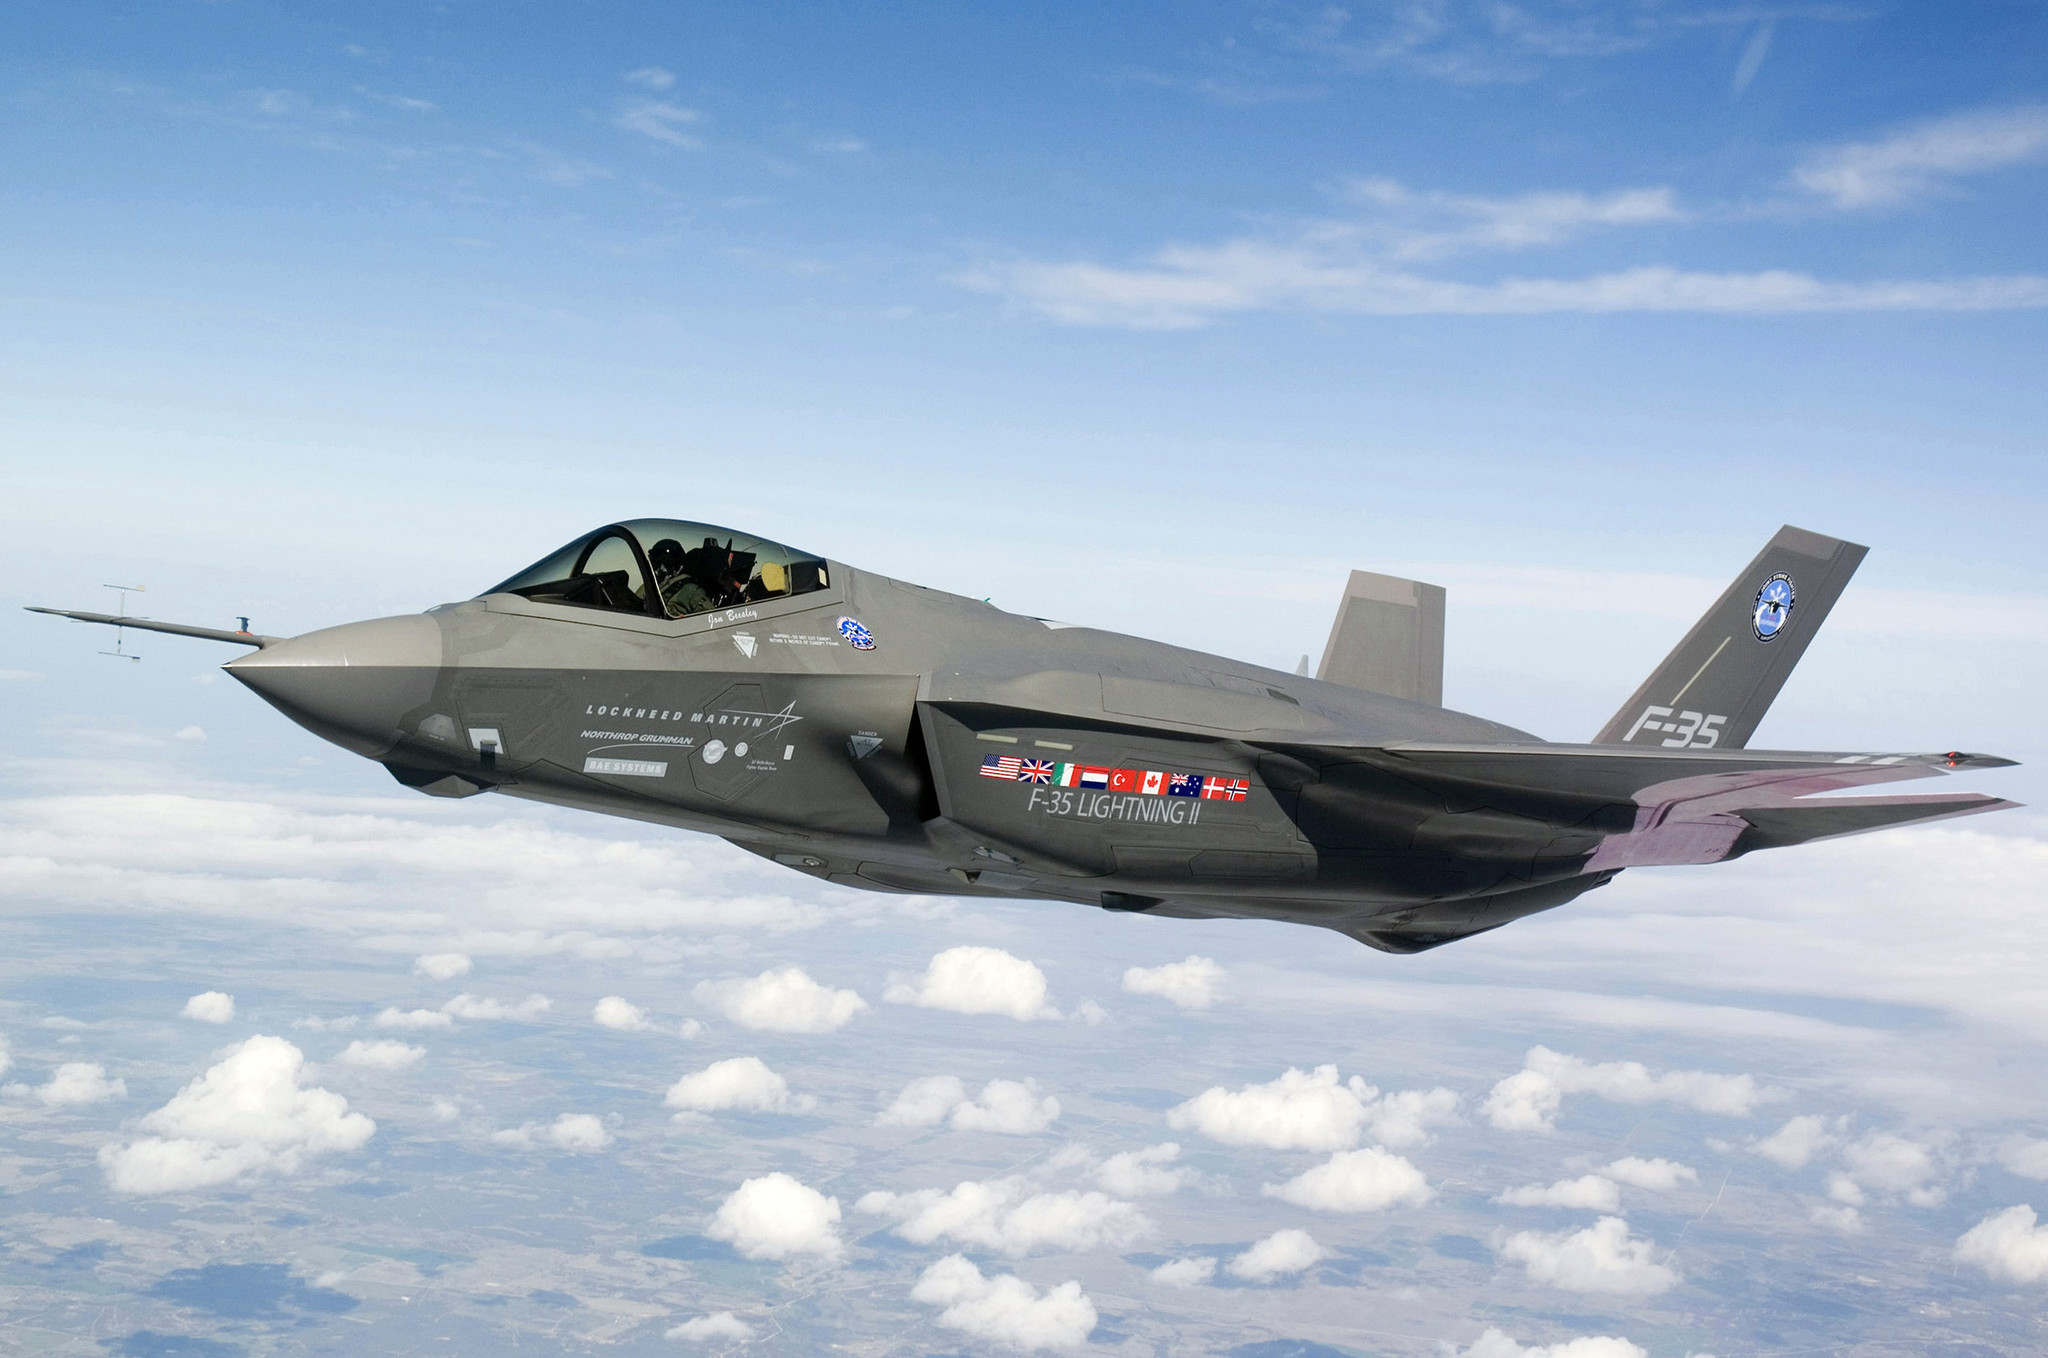 Trump targets F-35, but aircraft means jobs in 45 states - Chicago ...